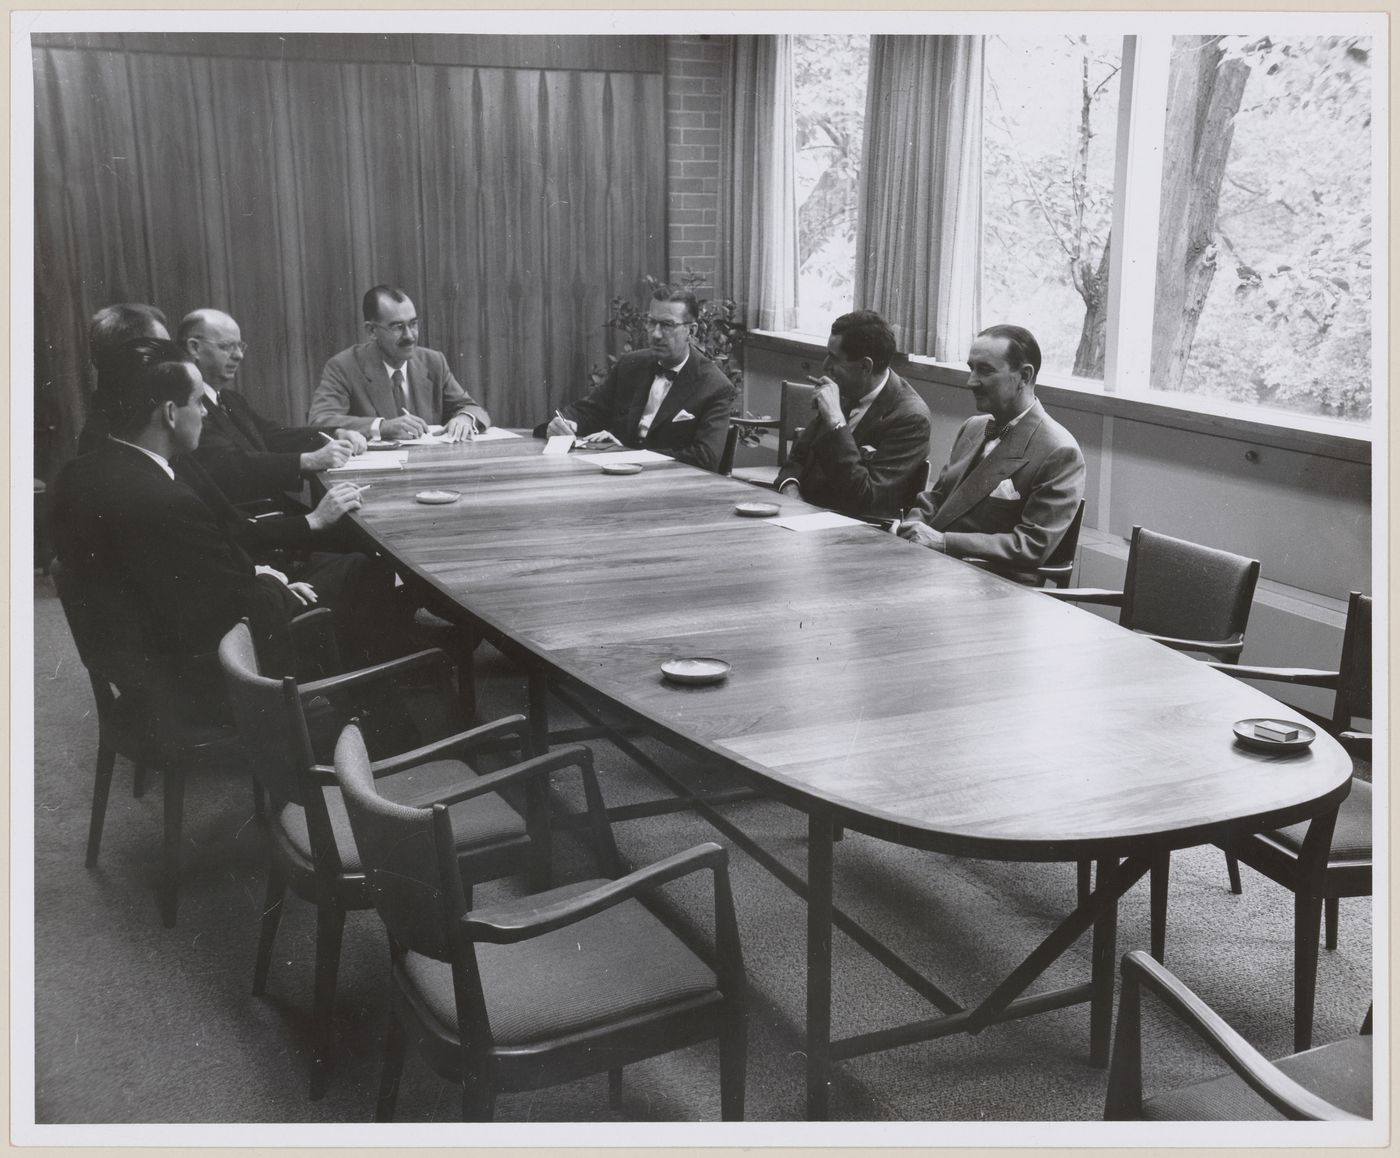 John C. Parkin and colleagues in boardroom meeting at John B. Parkin Associates Office at 1500 Don Mills Road